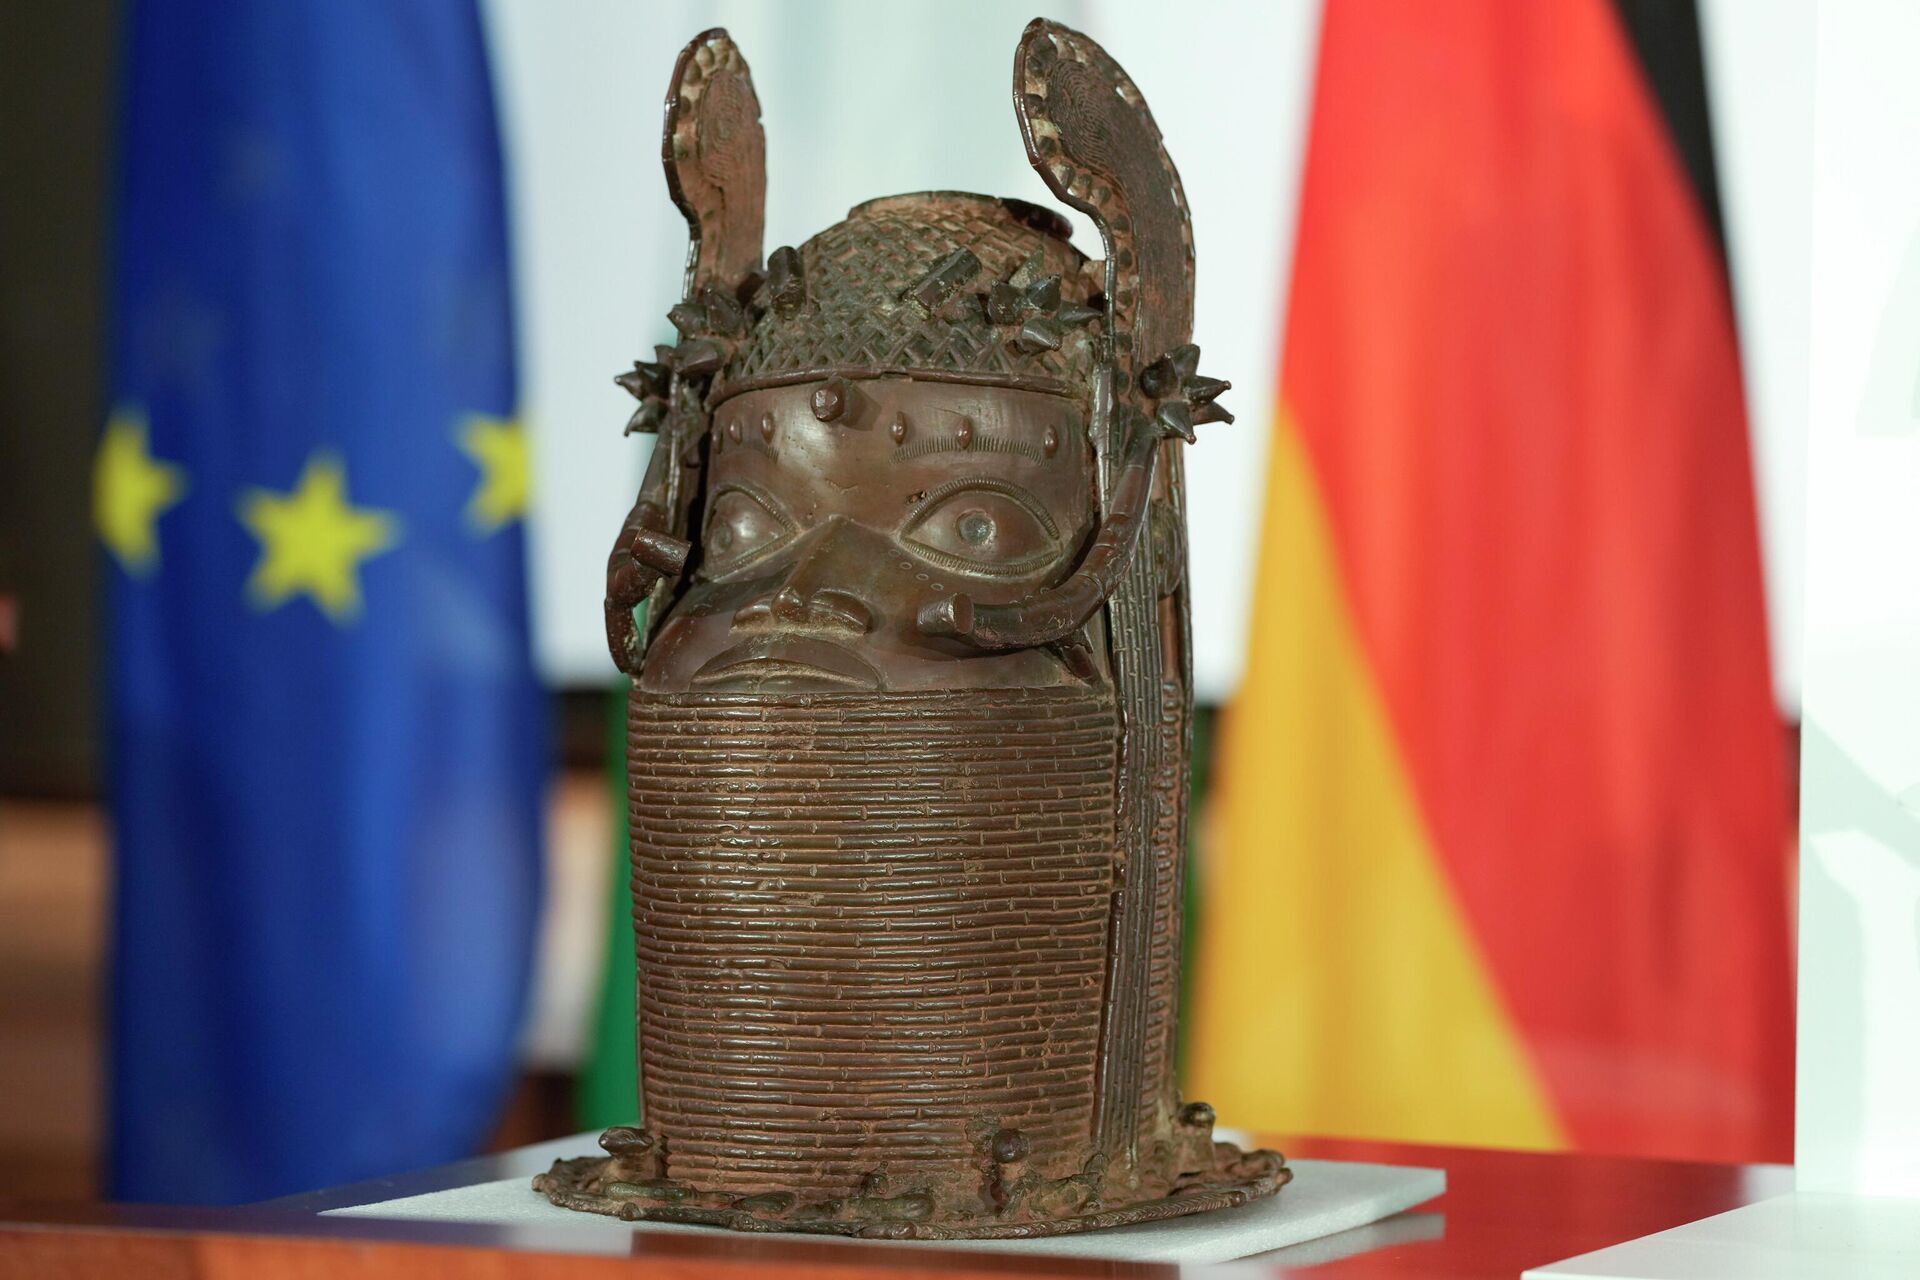 A Benin Bronze sculpture is presented at the German Foreign Ministry prior to the signing ceremony of a joint declaration between Germany and Nigeria in Berlin, Germany, Friday, July 1, 2022. - Sputnik International, 1920, 13.09.2022